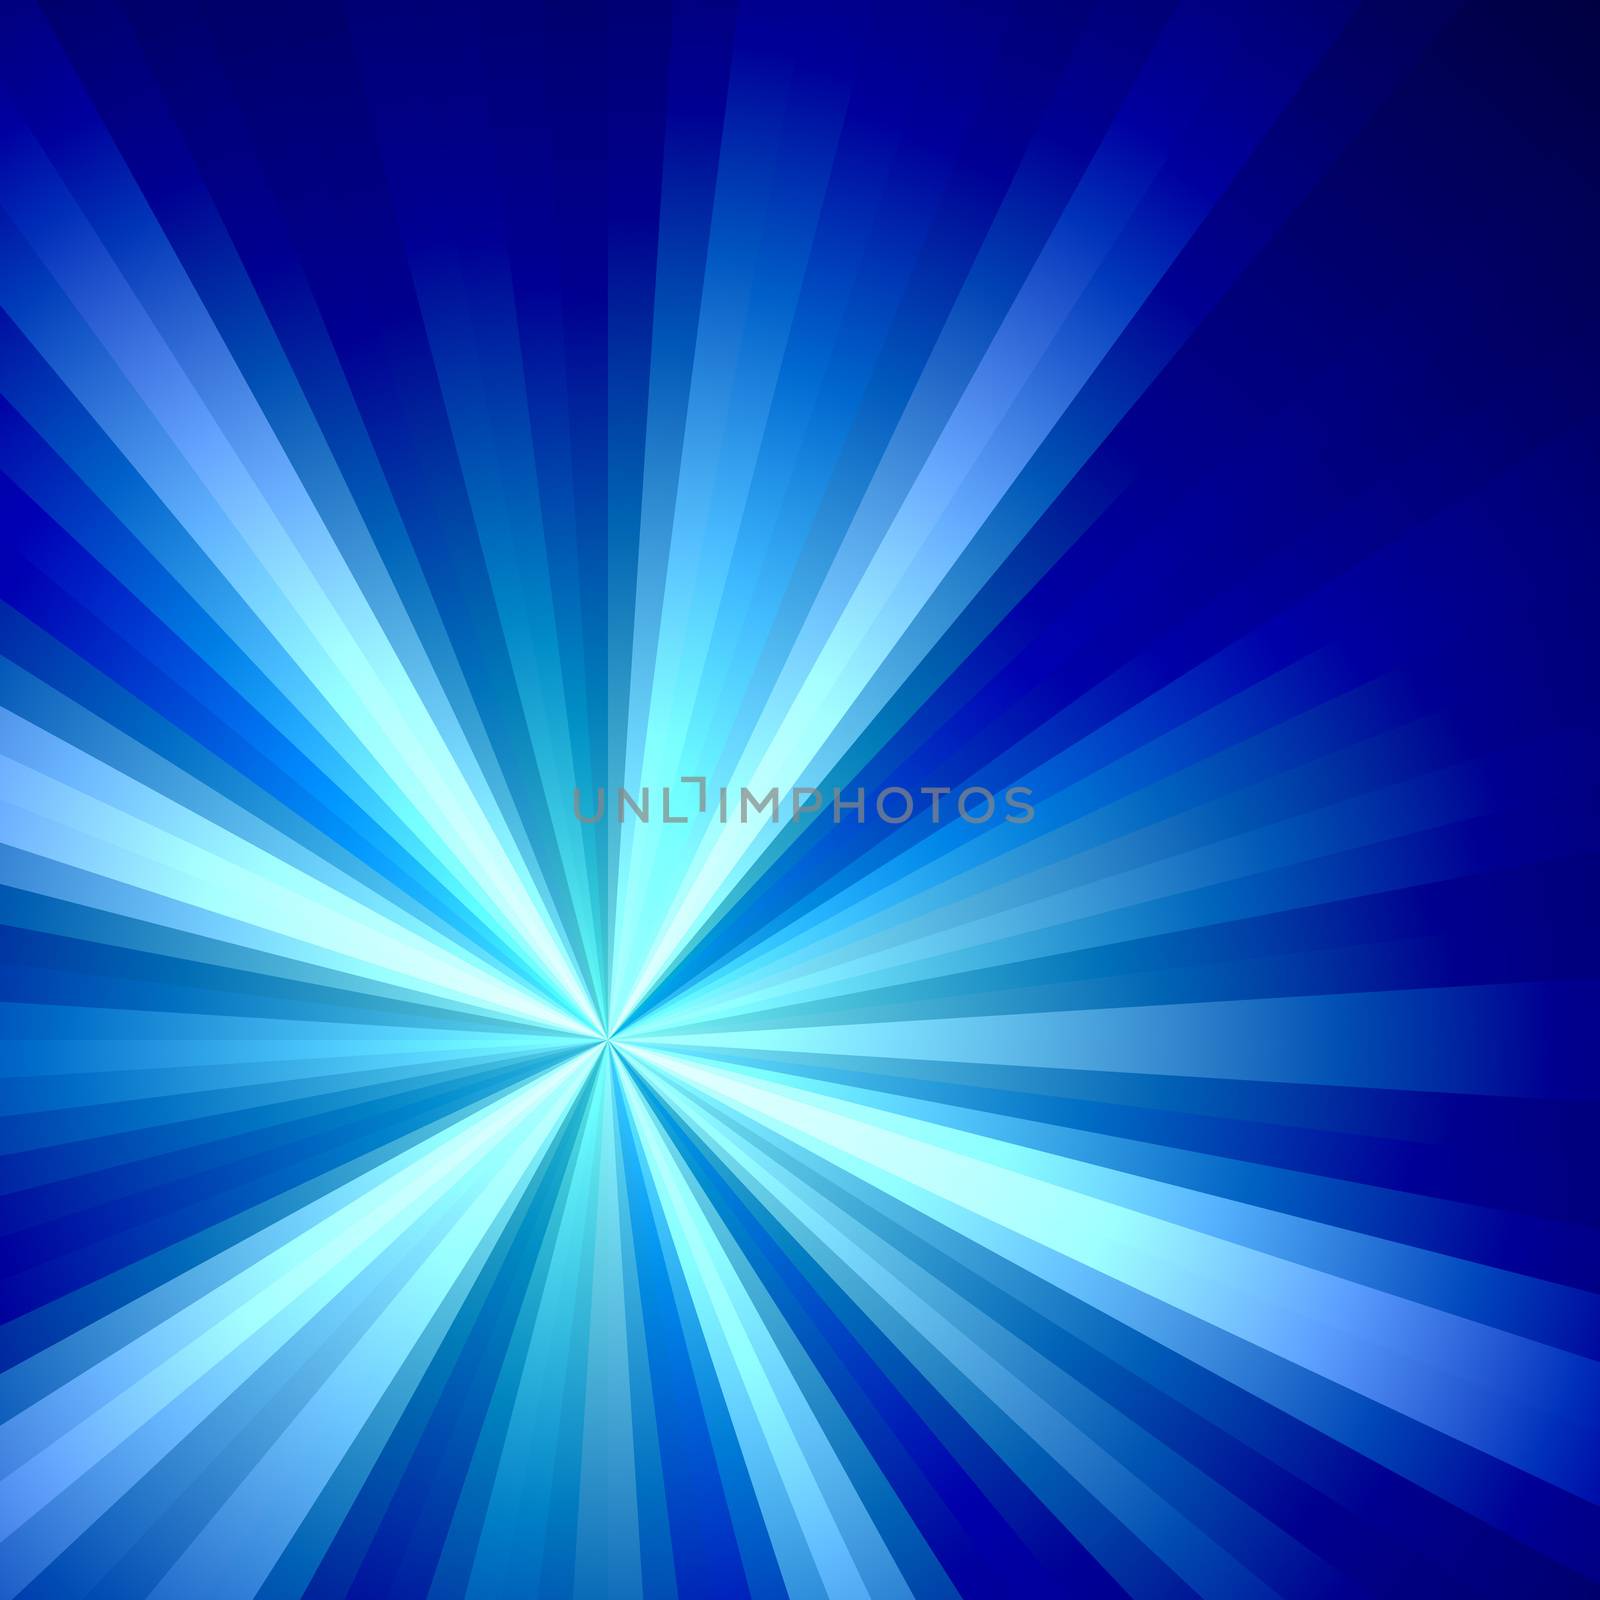 A bright fractal solar burst illustration in tons of blue and purple that works great as a design element.